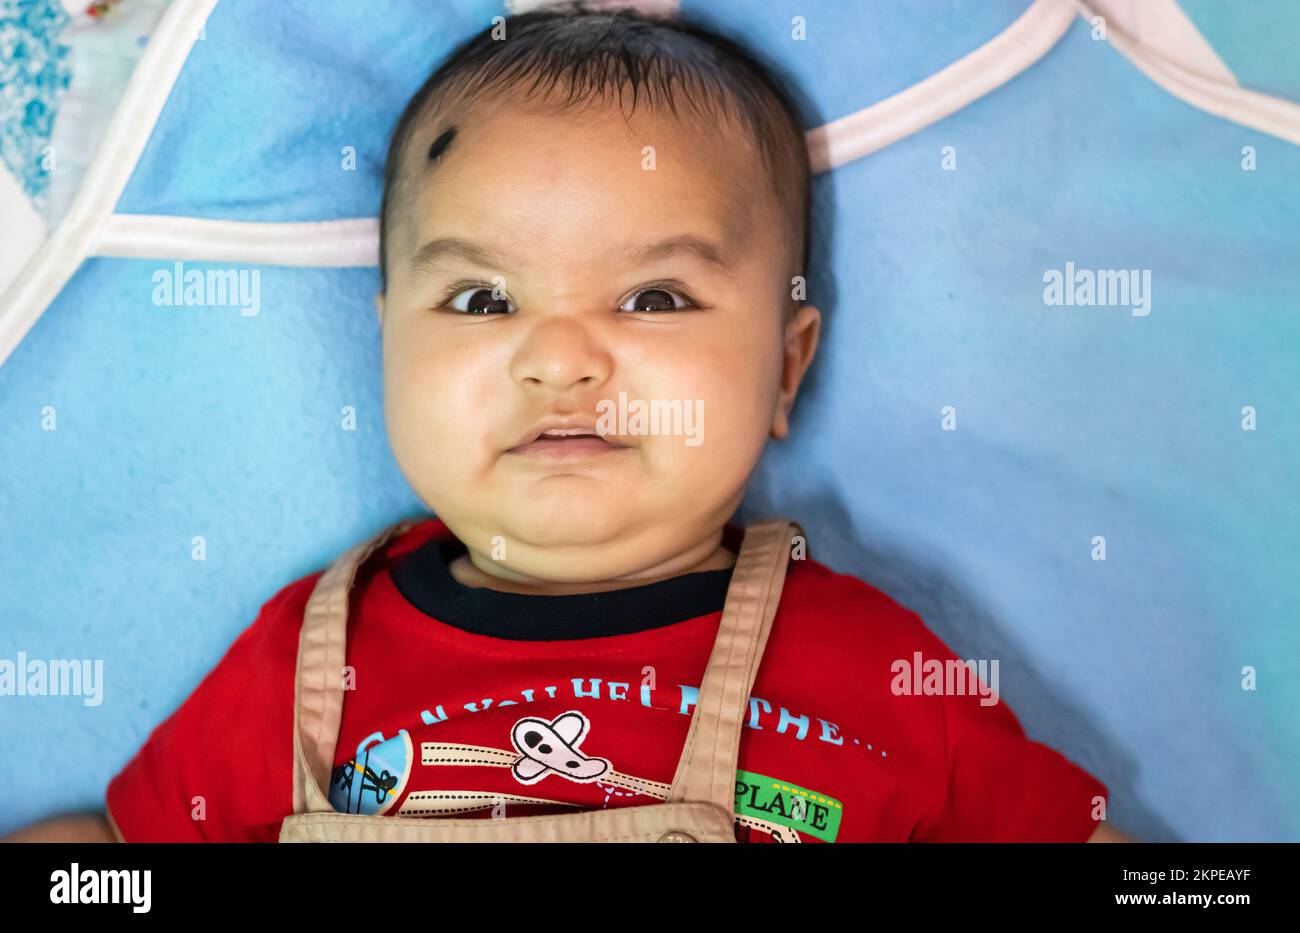 cute infant facial expressing from top angle indoor shot Stock Photo